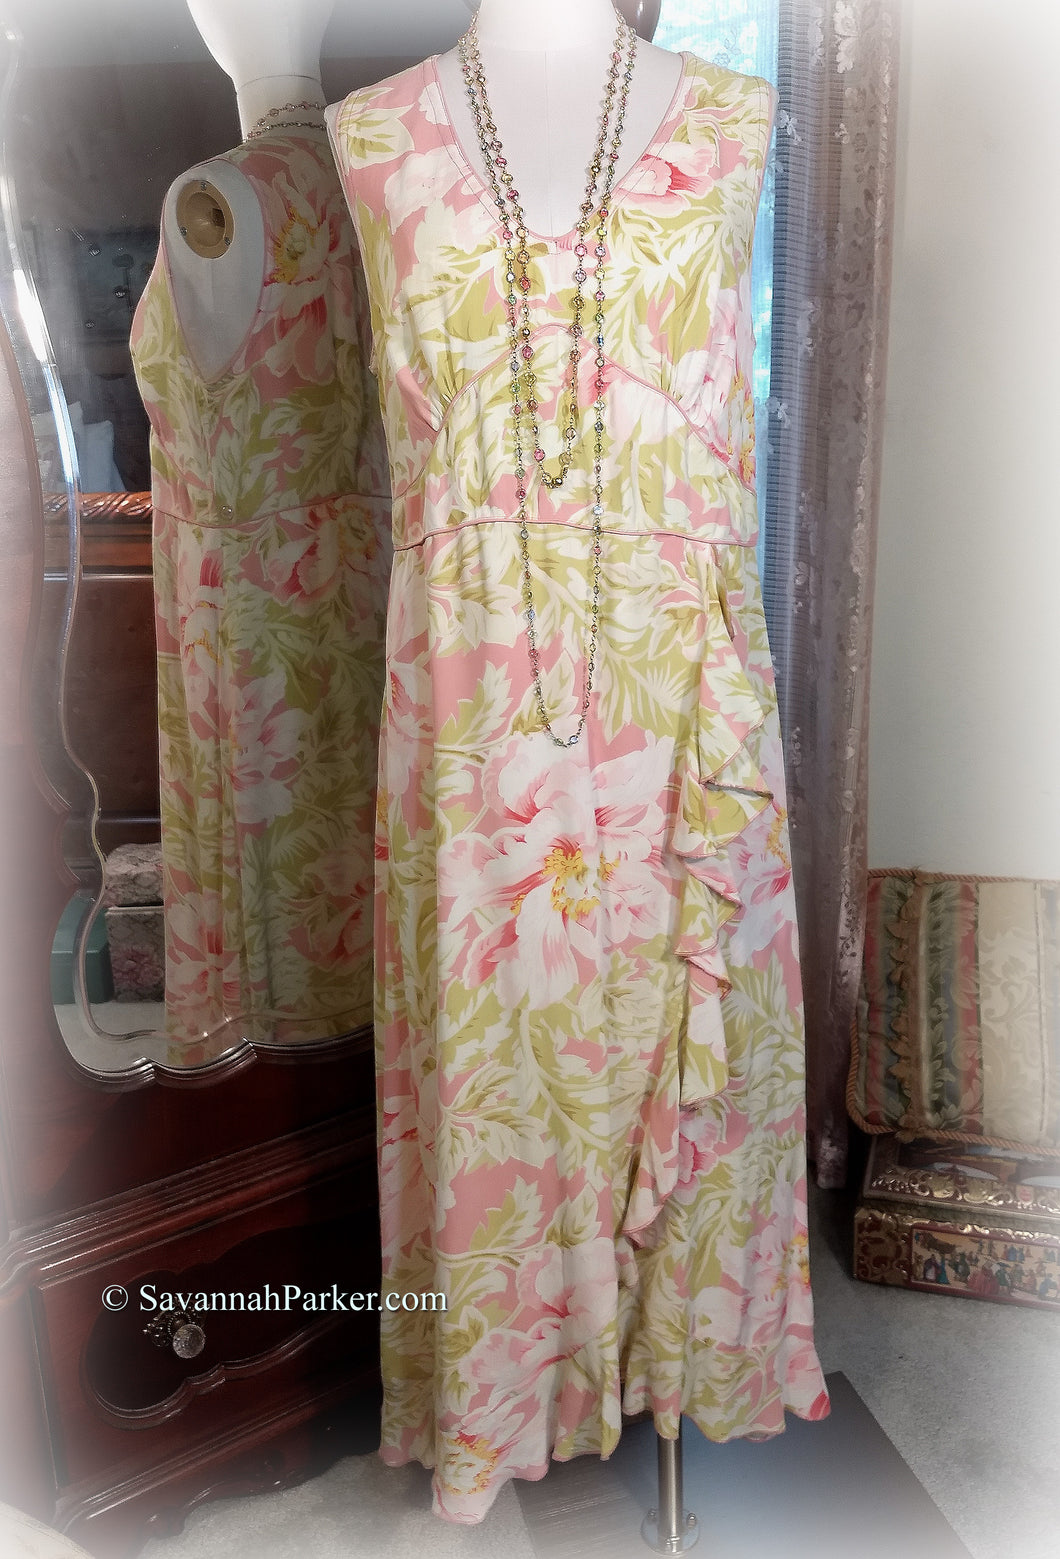 SOLD April Cornell Vintage - Pink Green Tropical Floral Rayon Crepe -1990s Does 1920s/30s Dress - Cottagecore - Asymmetrical Flounced Skirt